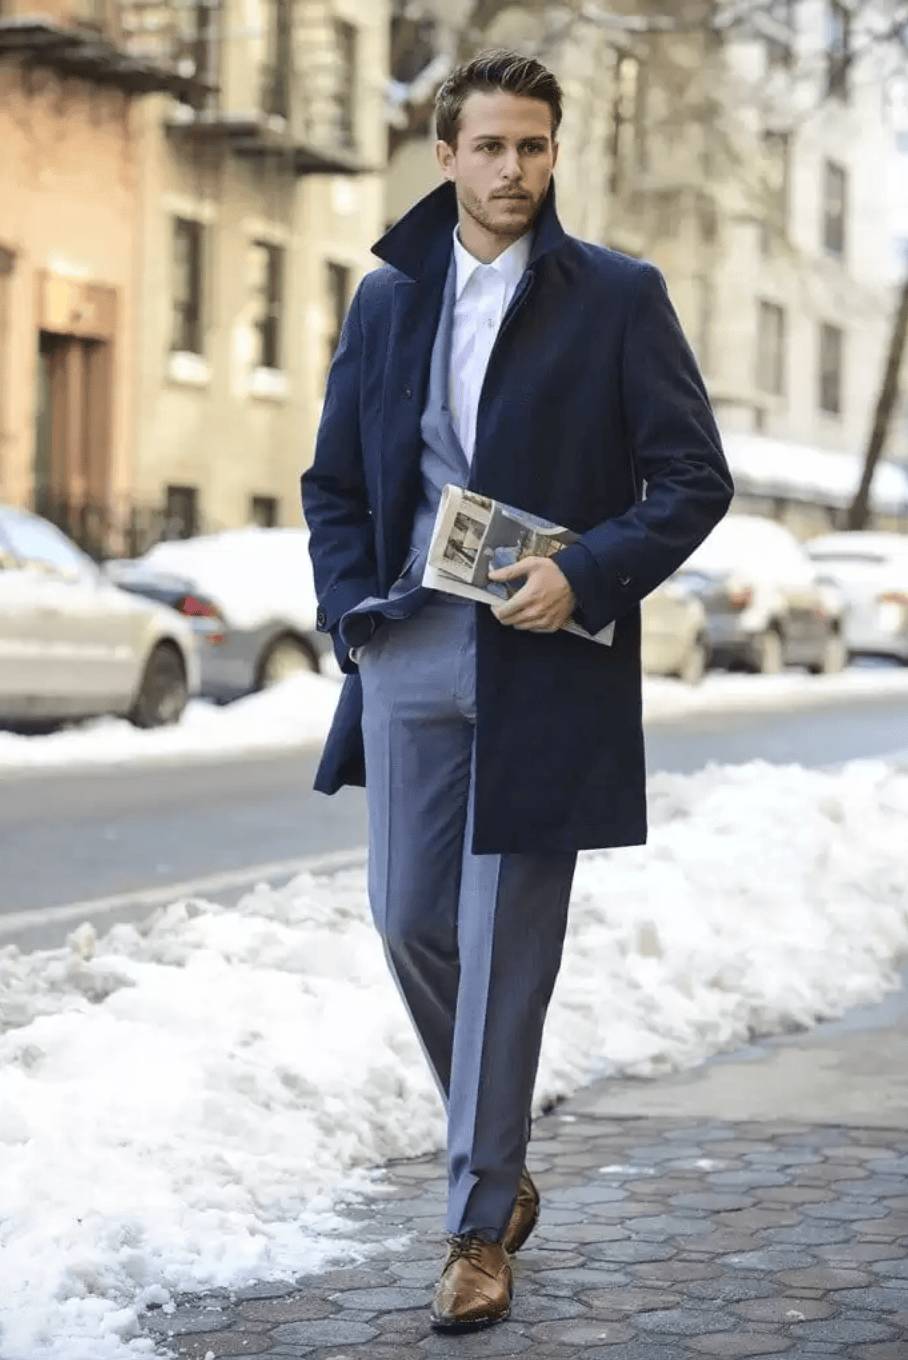 Top Male Fashion Influencers & How You Can Work With Them